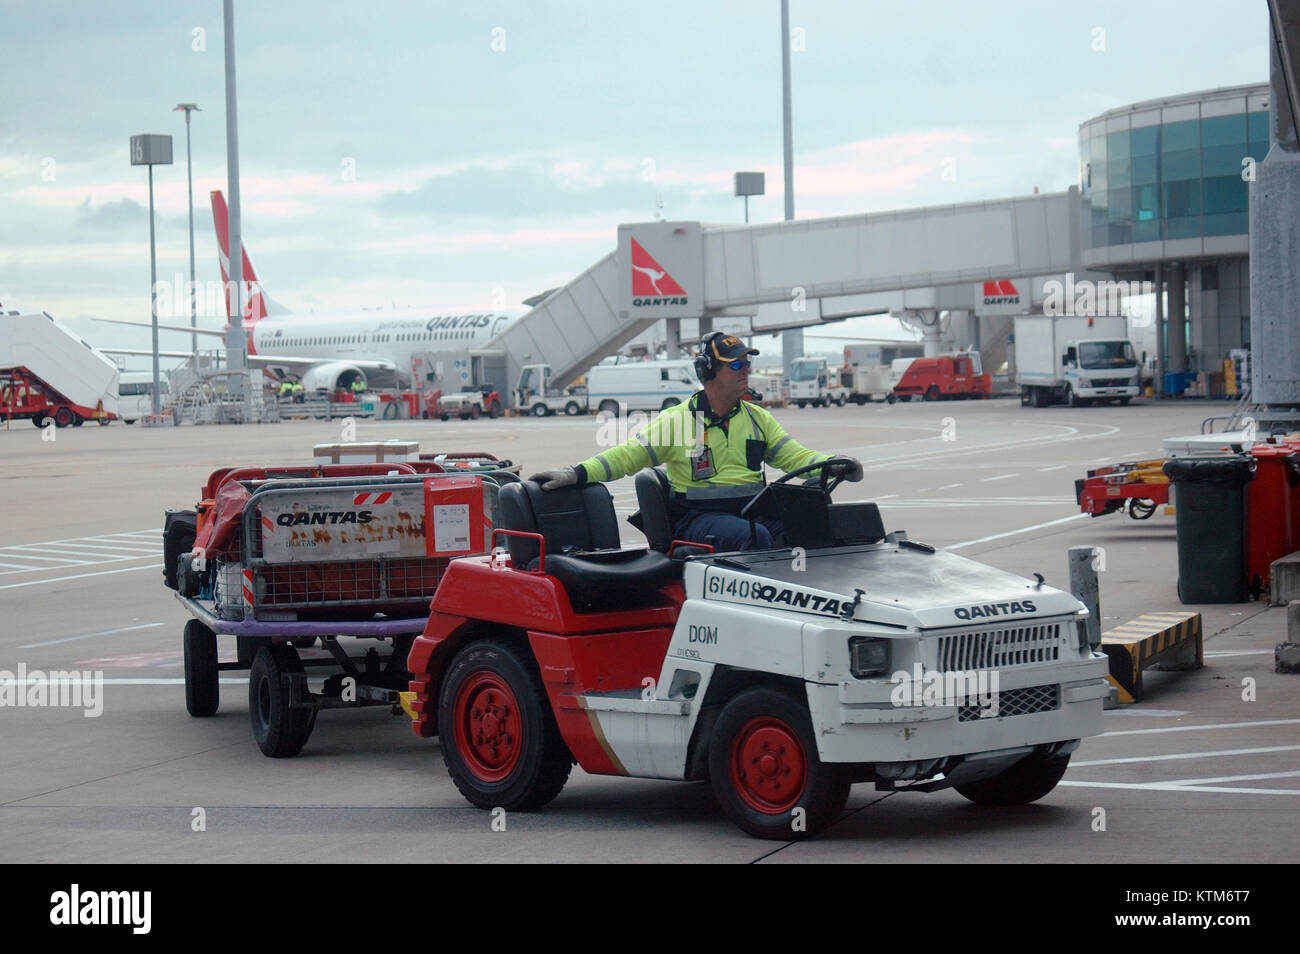 BRISBANE, AUSTRALIA, September 24, 2008: Baggage handlers load aircraft at Brisbane Domestic Airpport Terminal on September 24, 2008 in Brisbane, Aust Stock Photo